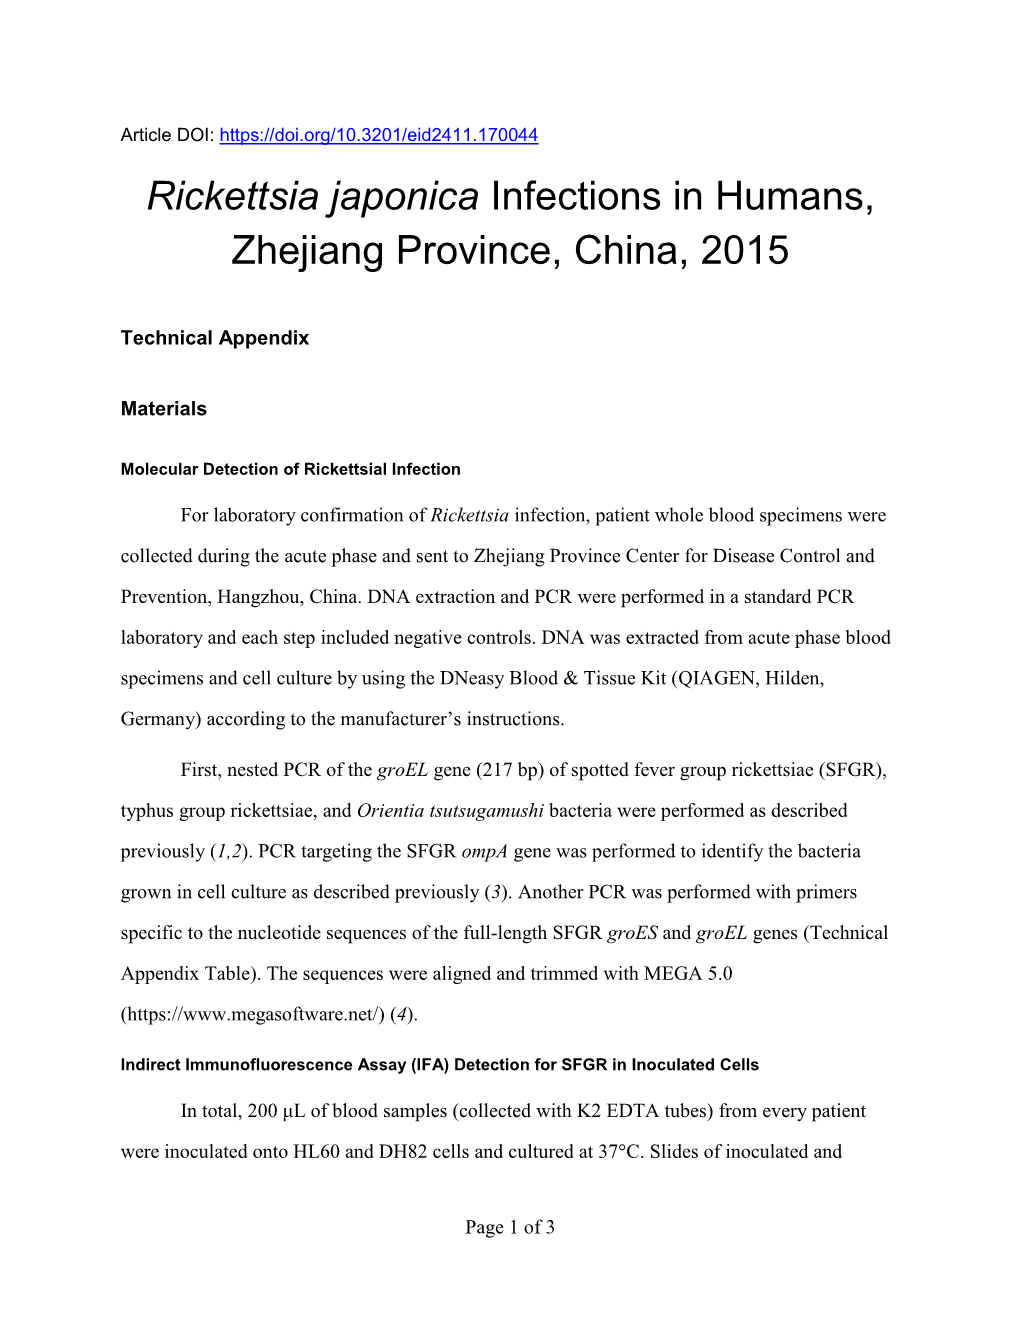 Rickettsia Japonica Infections in Humans, Zhejiang Province, China, 2015